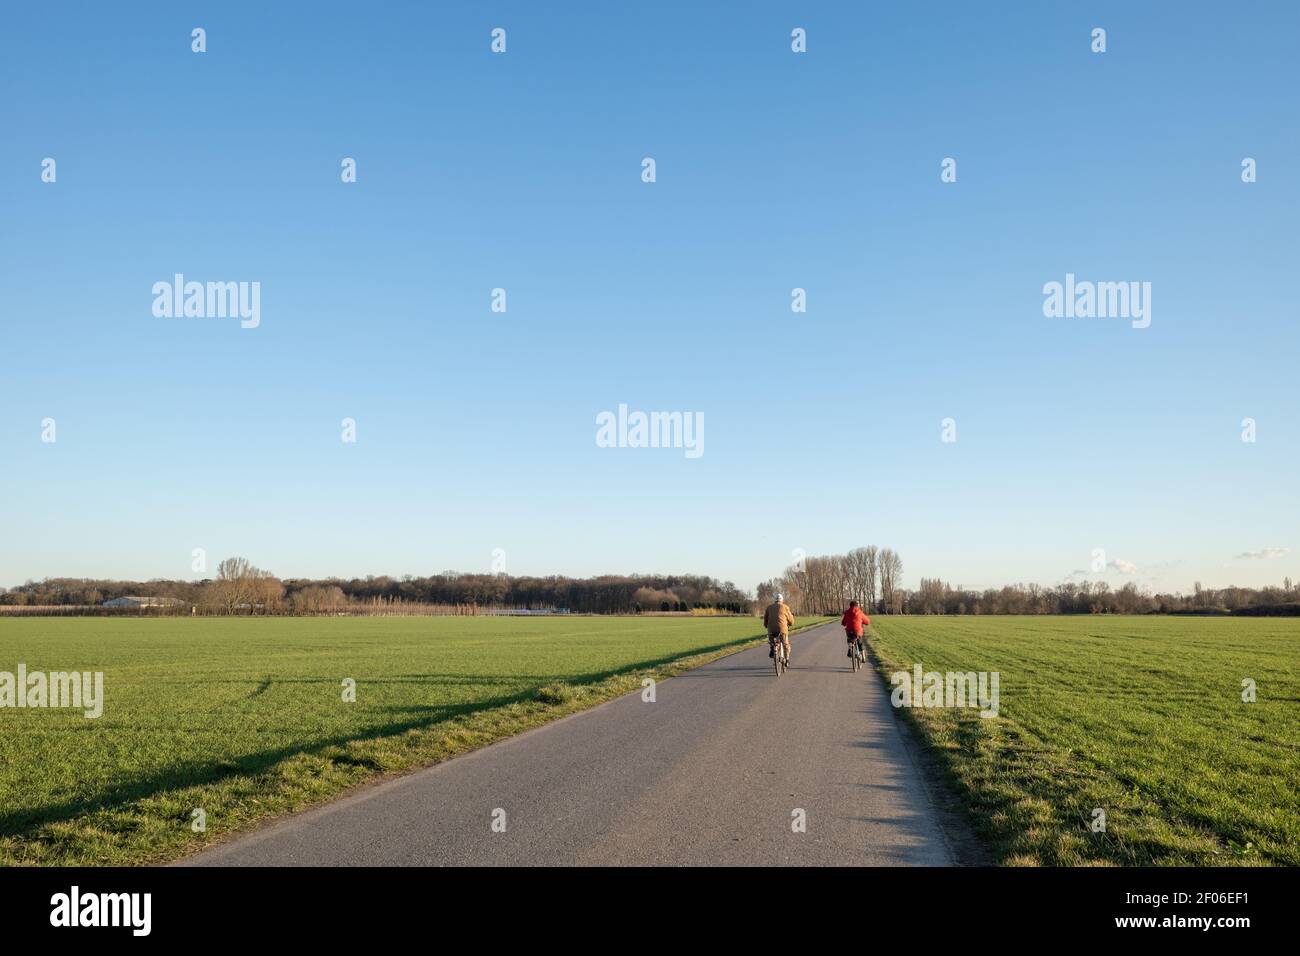 Outdoor sunny view of cyclists ride a bicycle on small road in suburb area surrounded with green agricultural field spring season against blue sky. Stock Photo